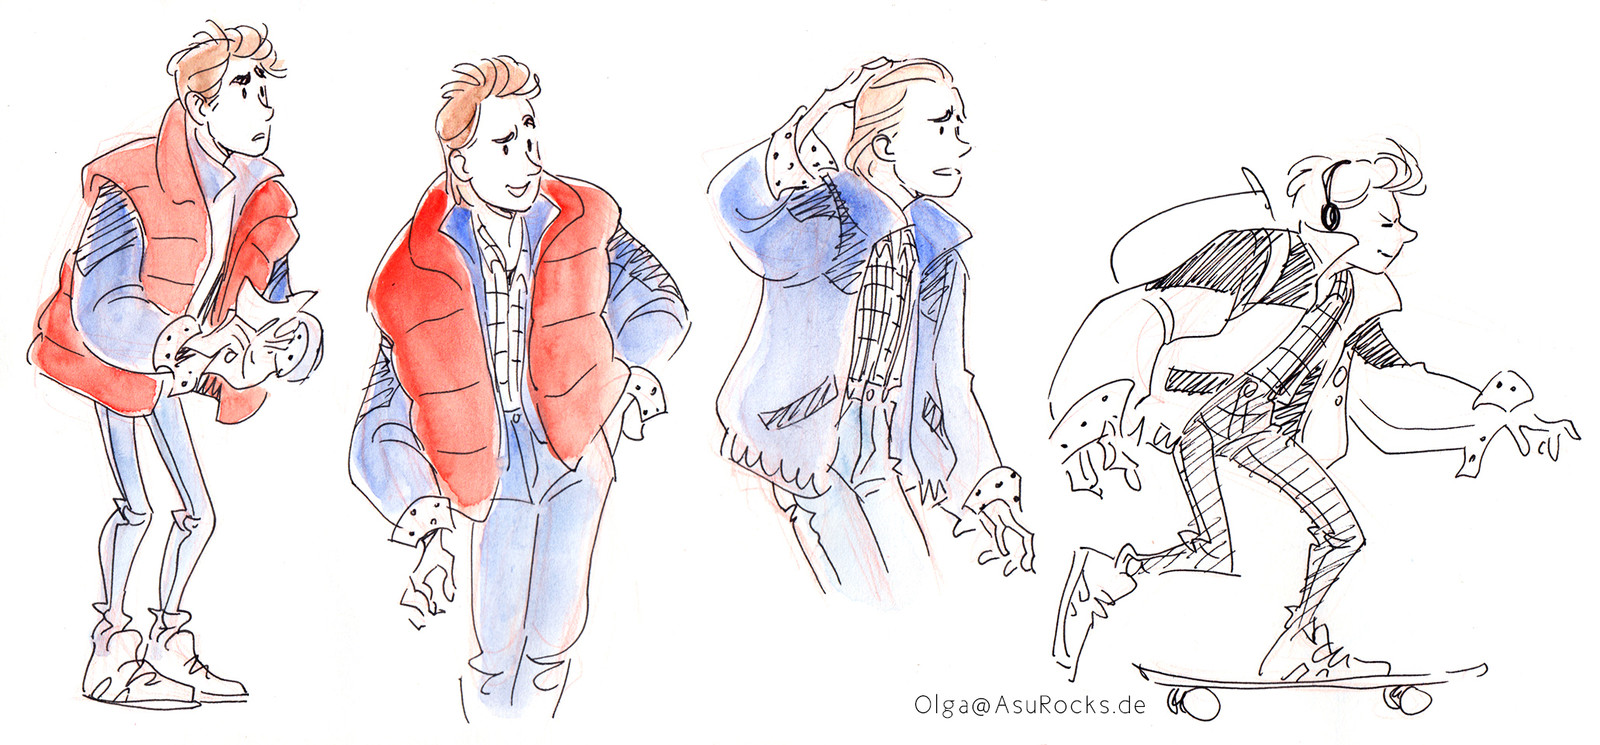 Character studies from some movie